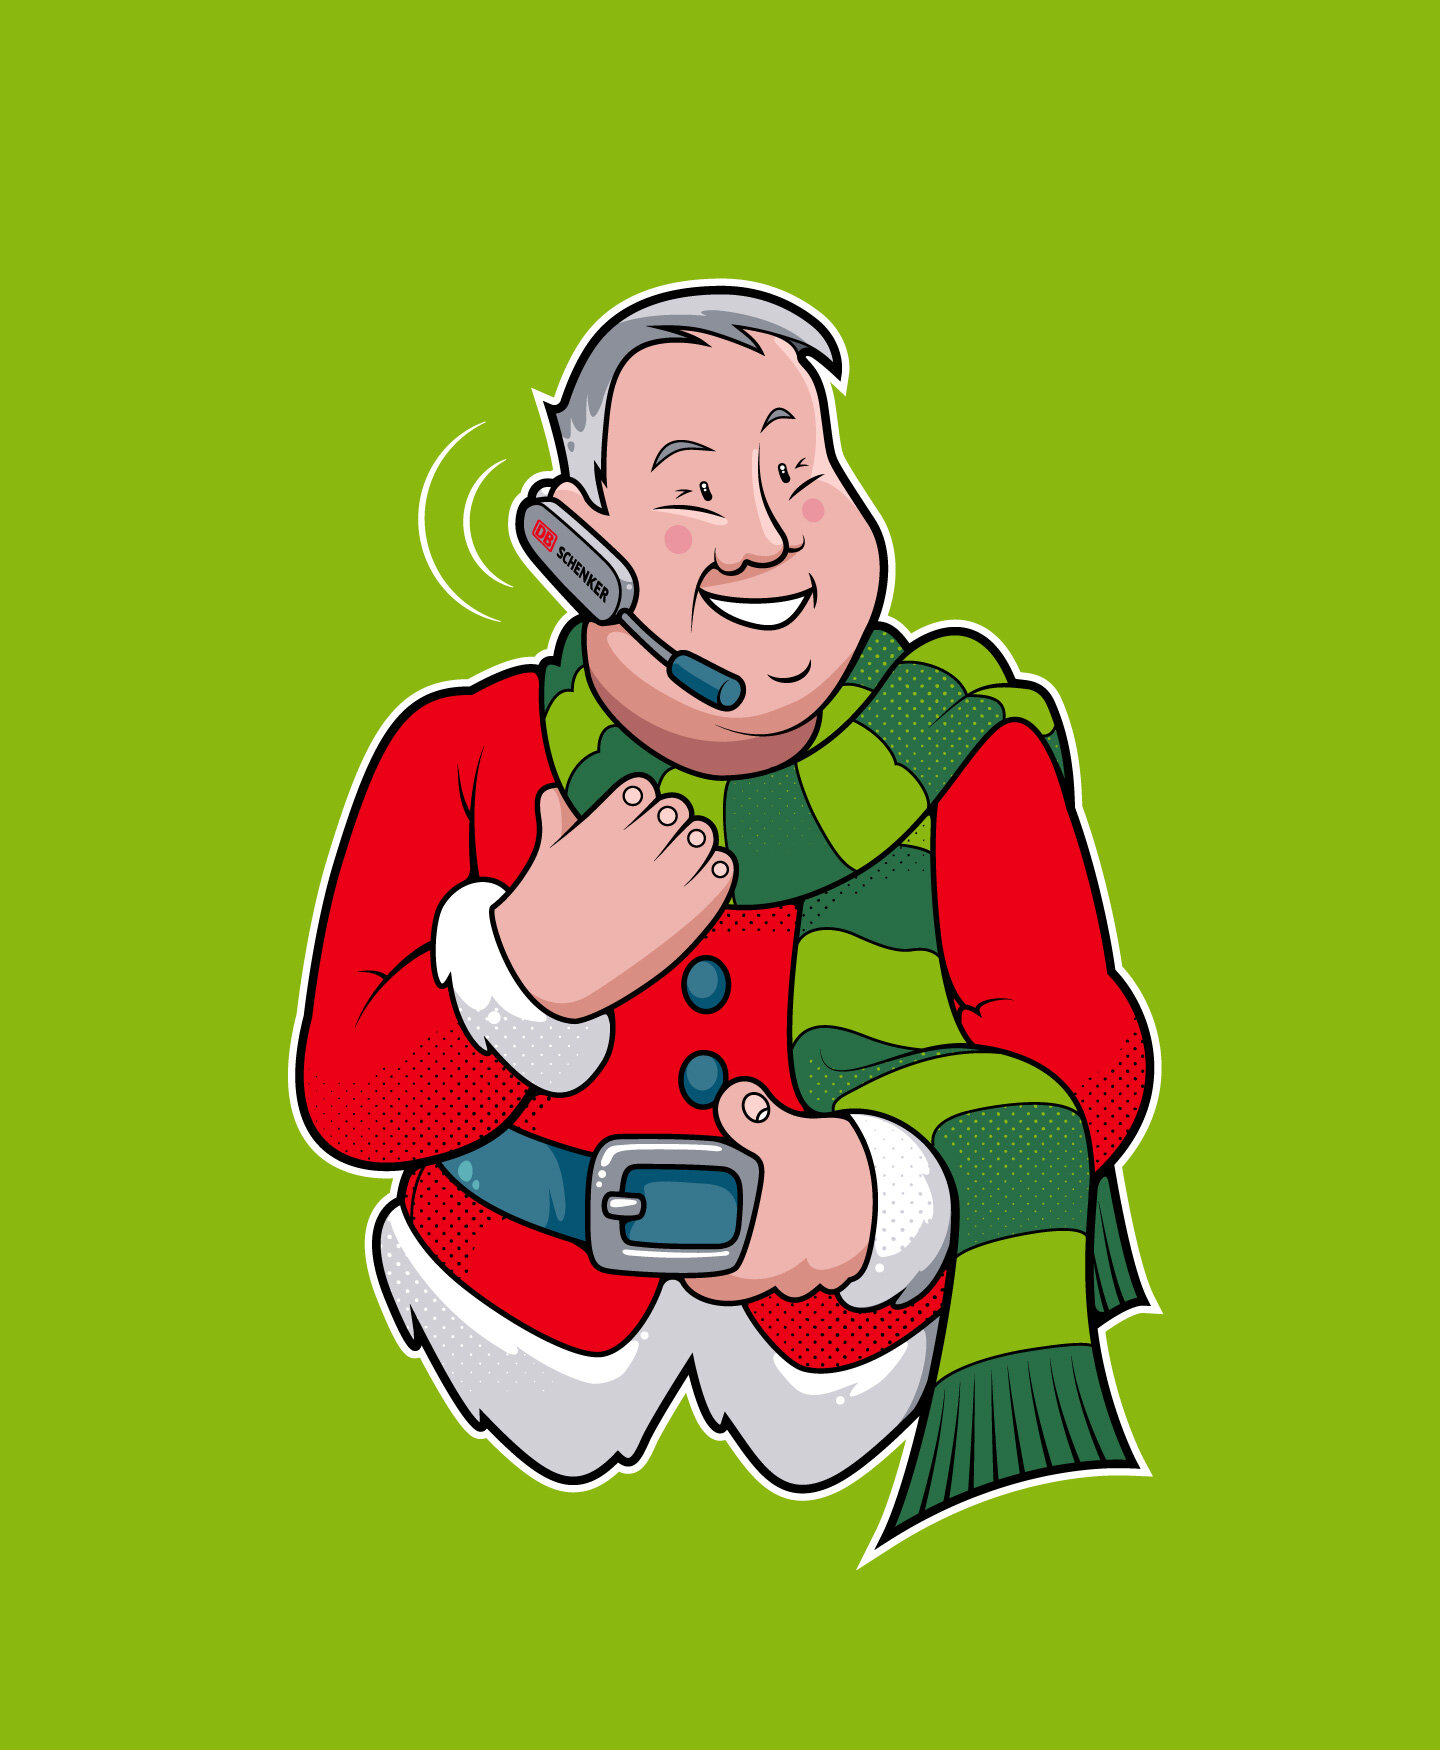 illustration_andre_levy_zhion_vector_pop_character_db_schenker_christmas_headset.jpg